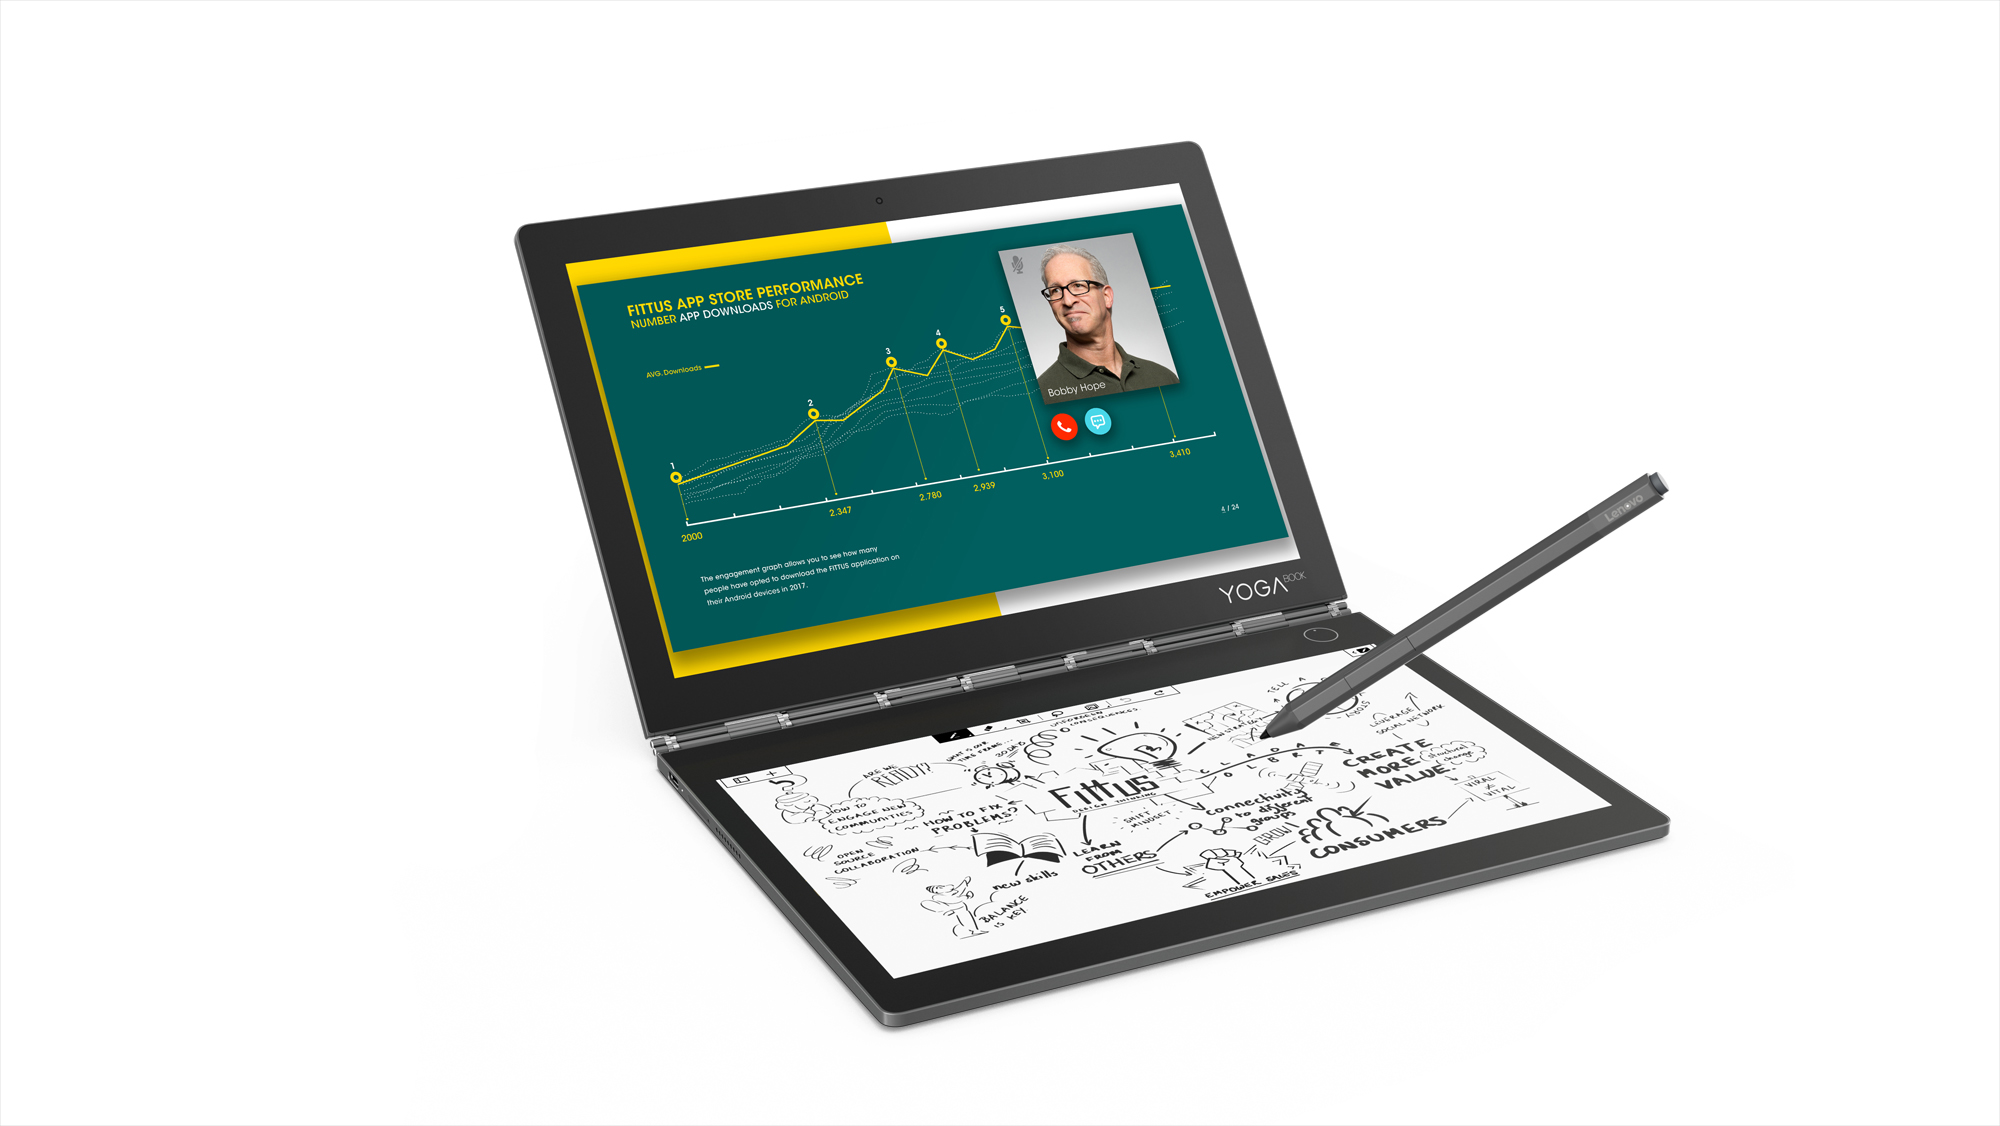 Lenovo's Yoga Book C930 swaps the keyboard for an E Ink display | TechCrunch